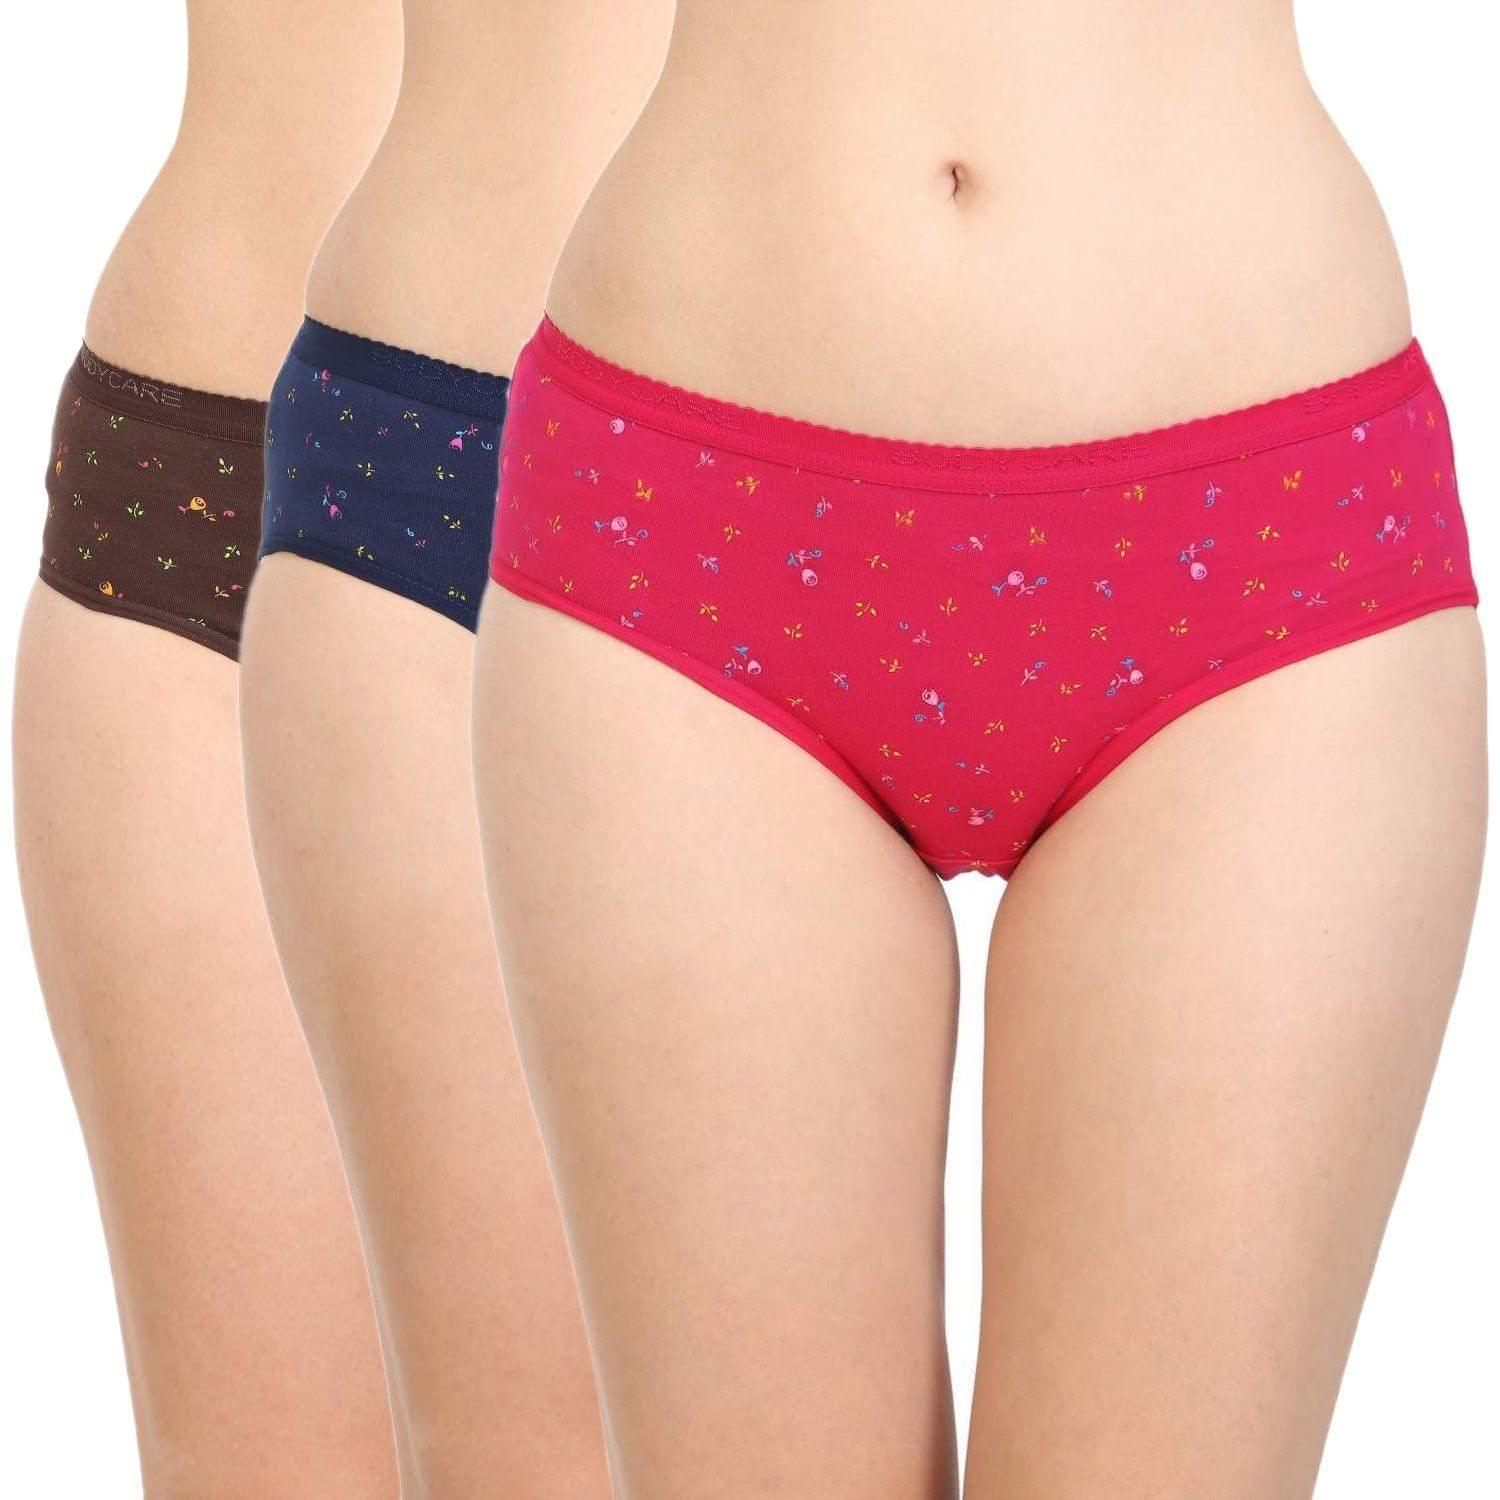 BODYCARE Women's Cotton Panties (Pack of 3) (4000-XL_Color May